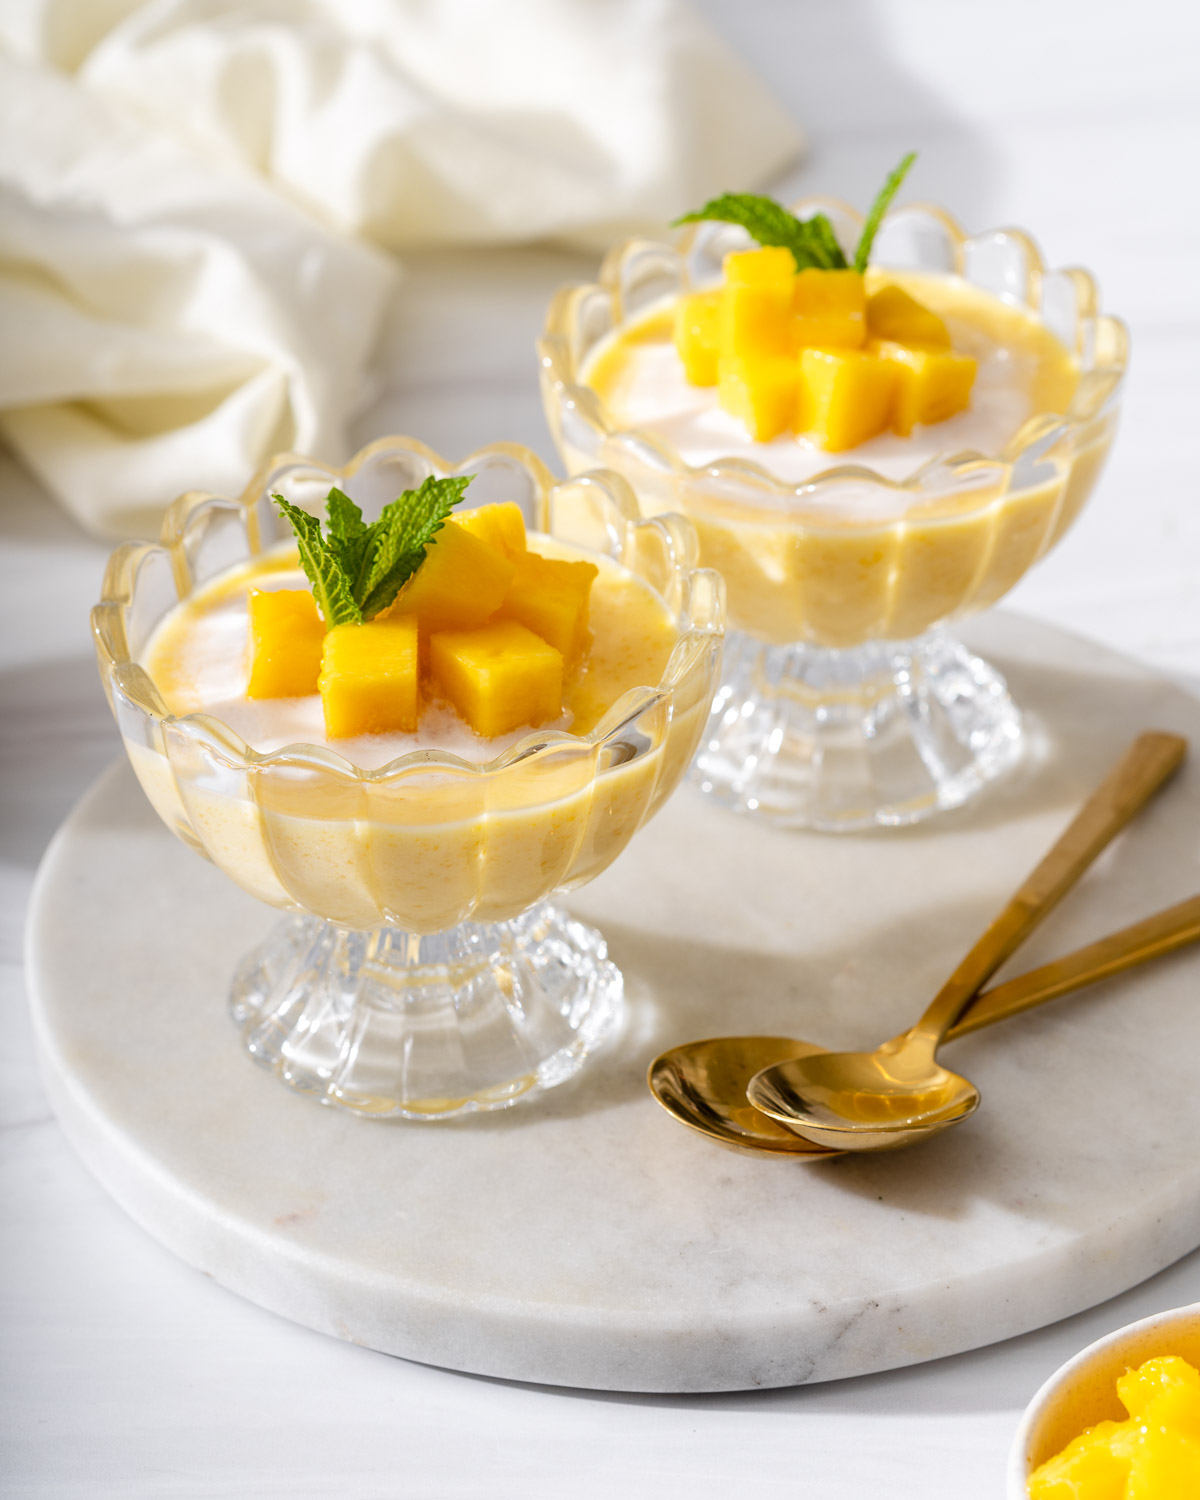 A serving tray with two dishes of mango pudding, fresh mango, and two spoons.